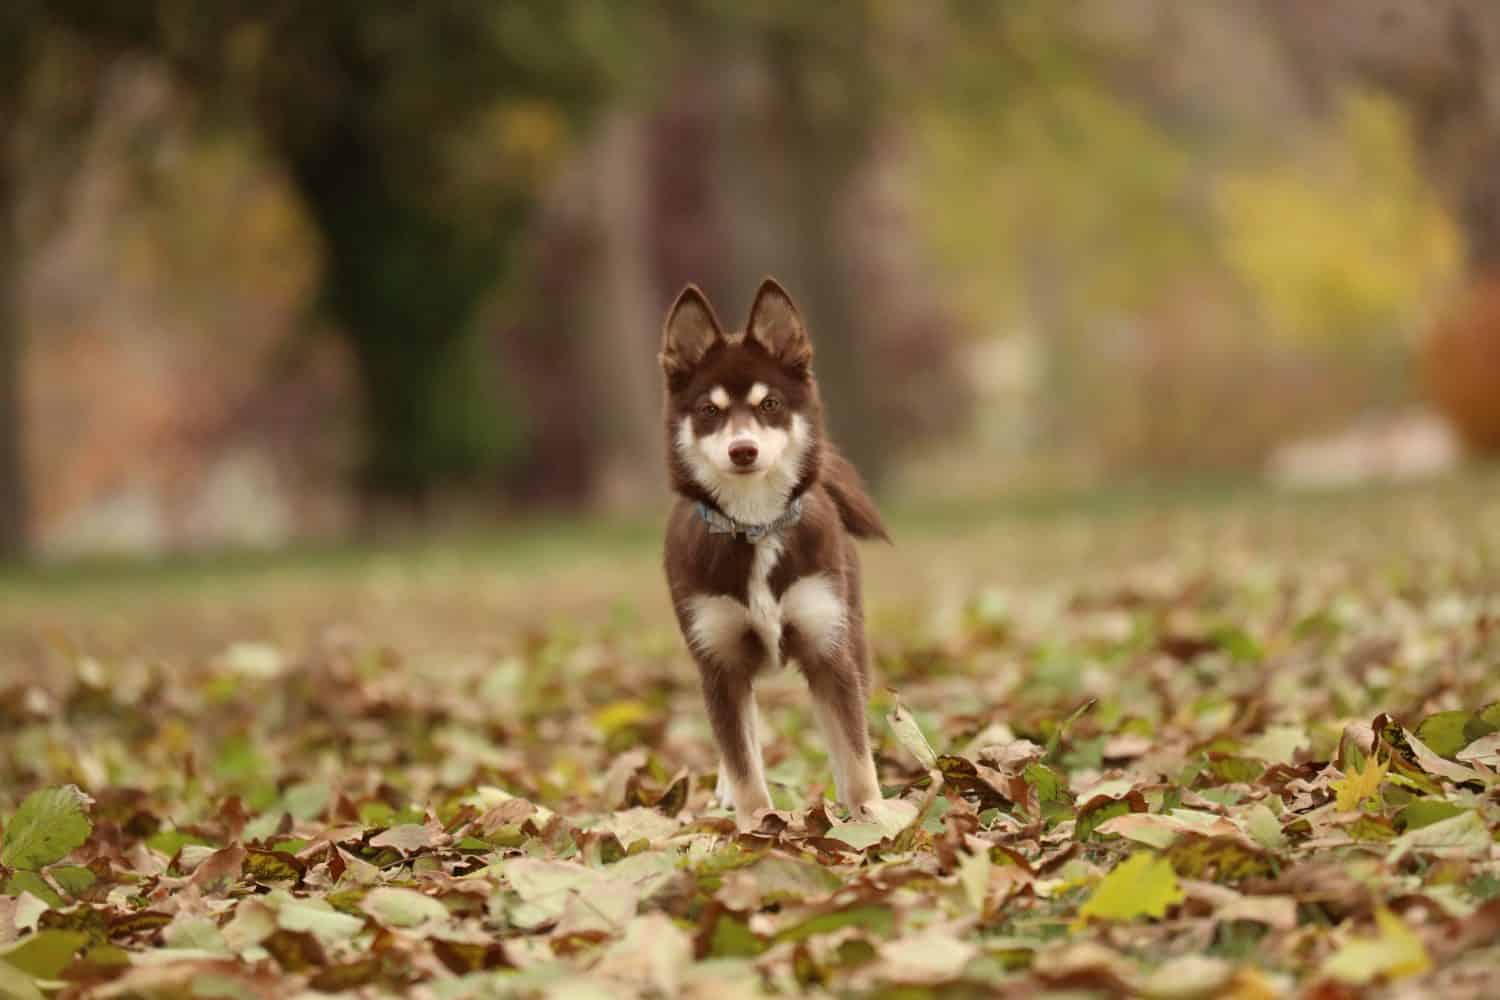 Puppy Pomsky standing in fall leaves